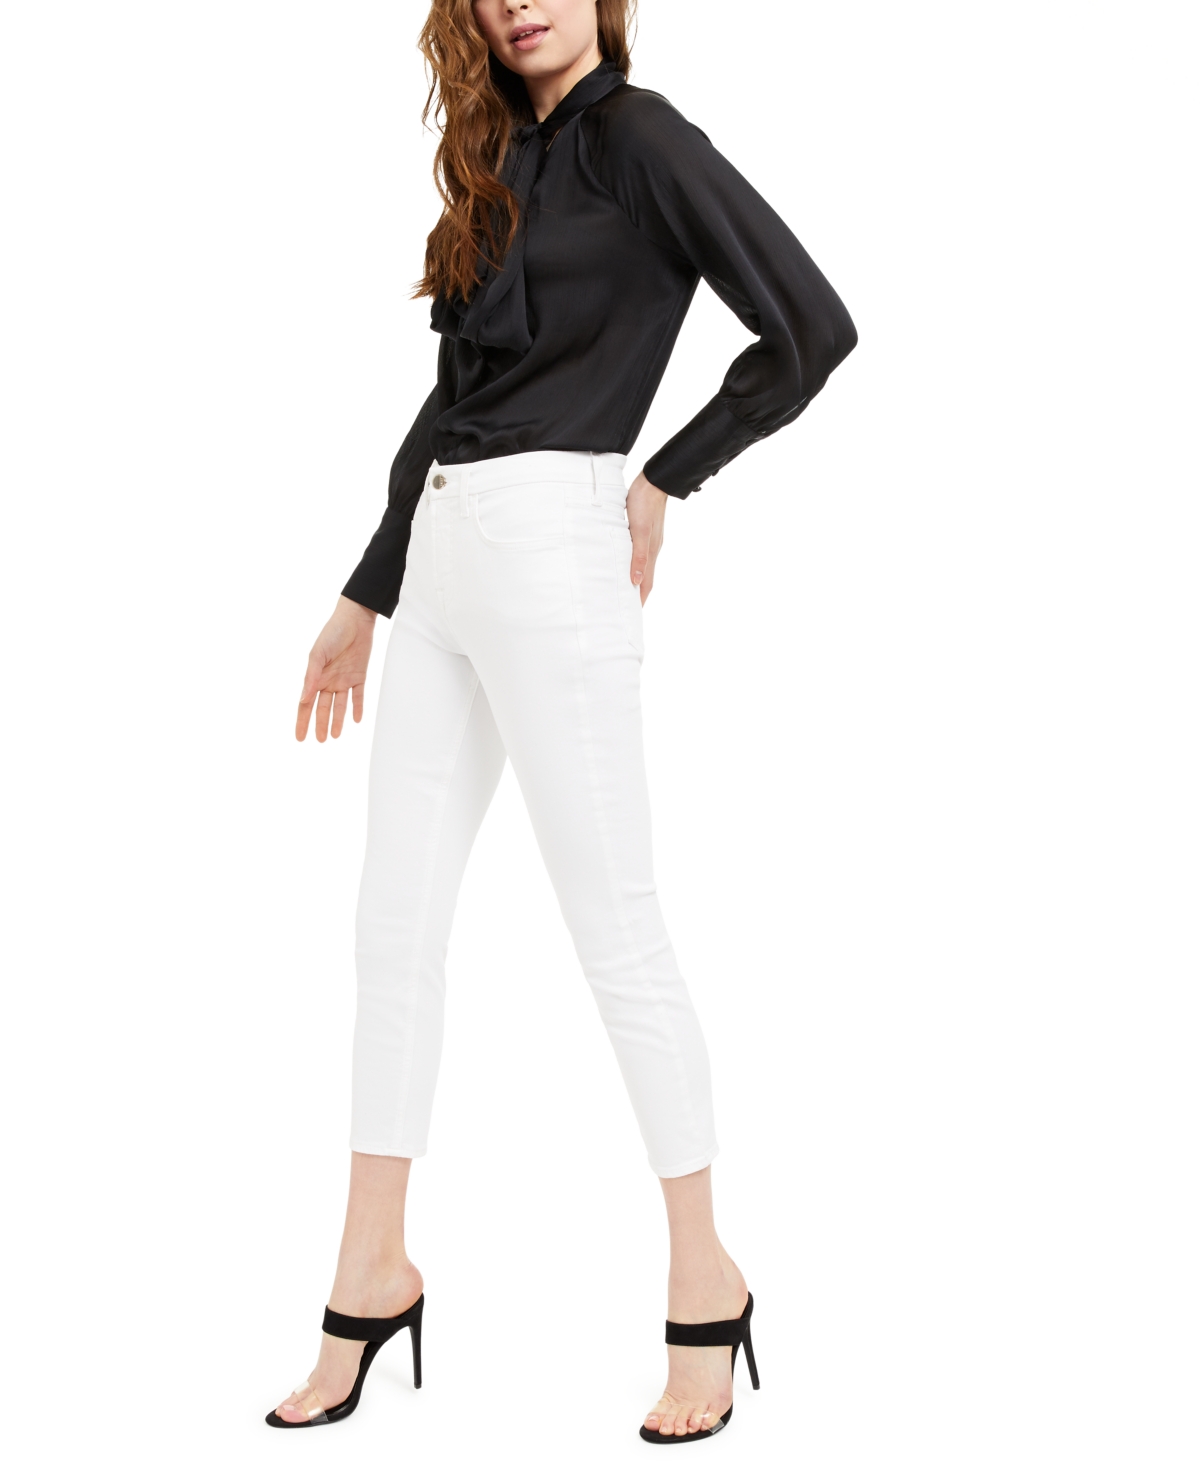  JEN7 by 7 For All Mankind Cropped Skinny Jeans